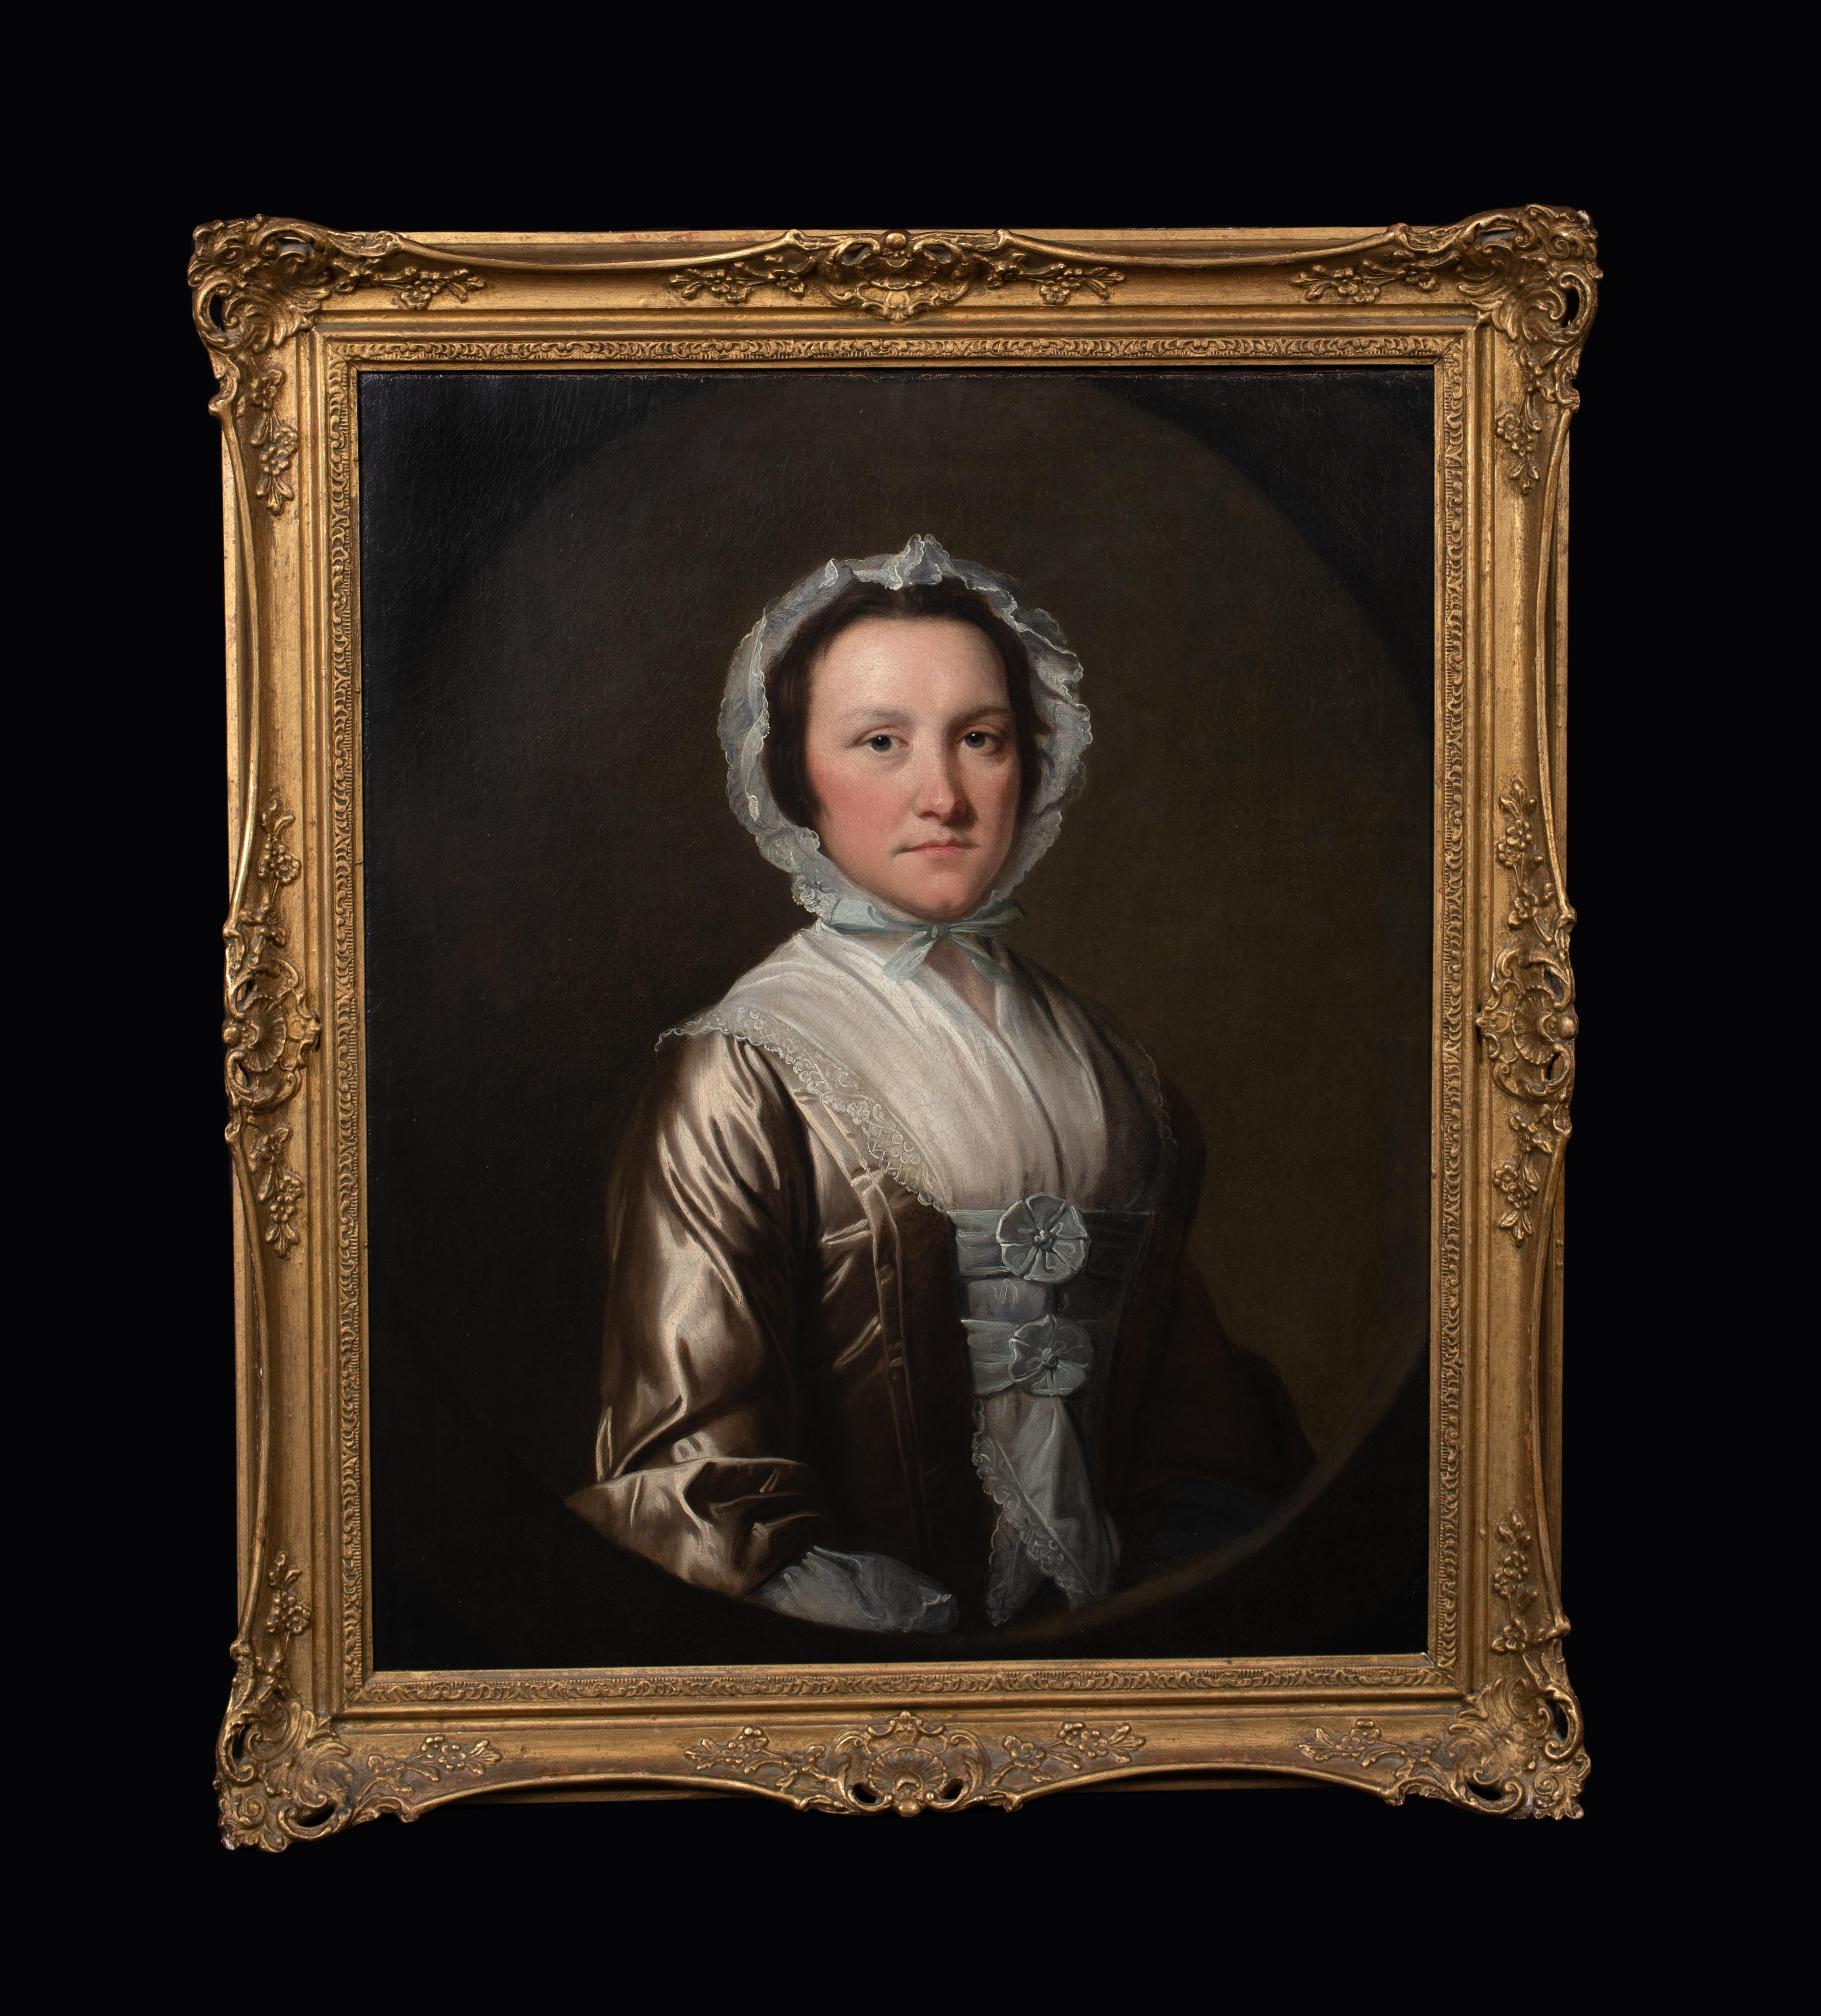 Portrait Of Lady Mary Osborn, 18th Century

by Henry PICKERING (1720-1775)

Large 18th Century English portrait of a lady traditionally held to be Lady Mary Osborn, oil on canvas by Henry Pickering. Excellent quality and condition portrait of the